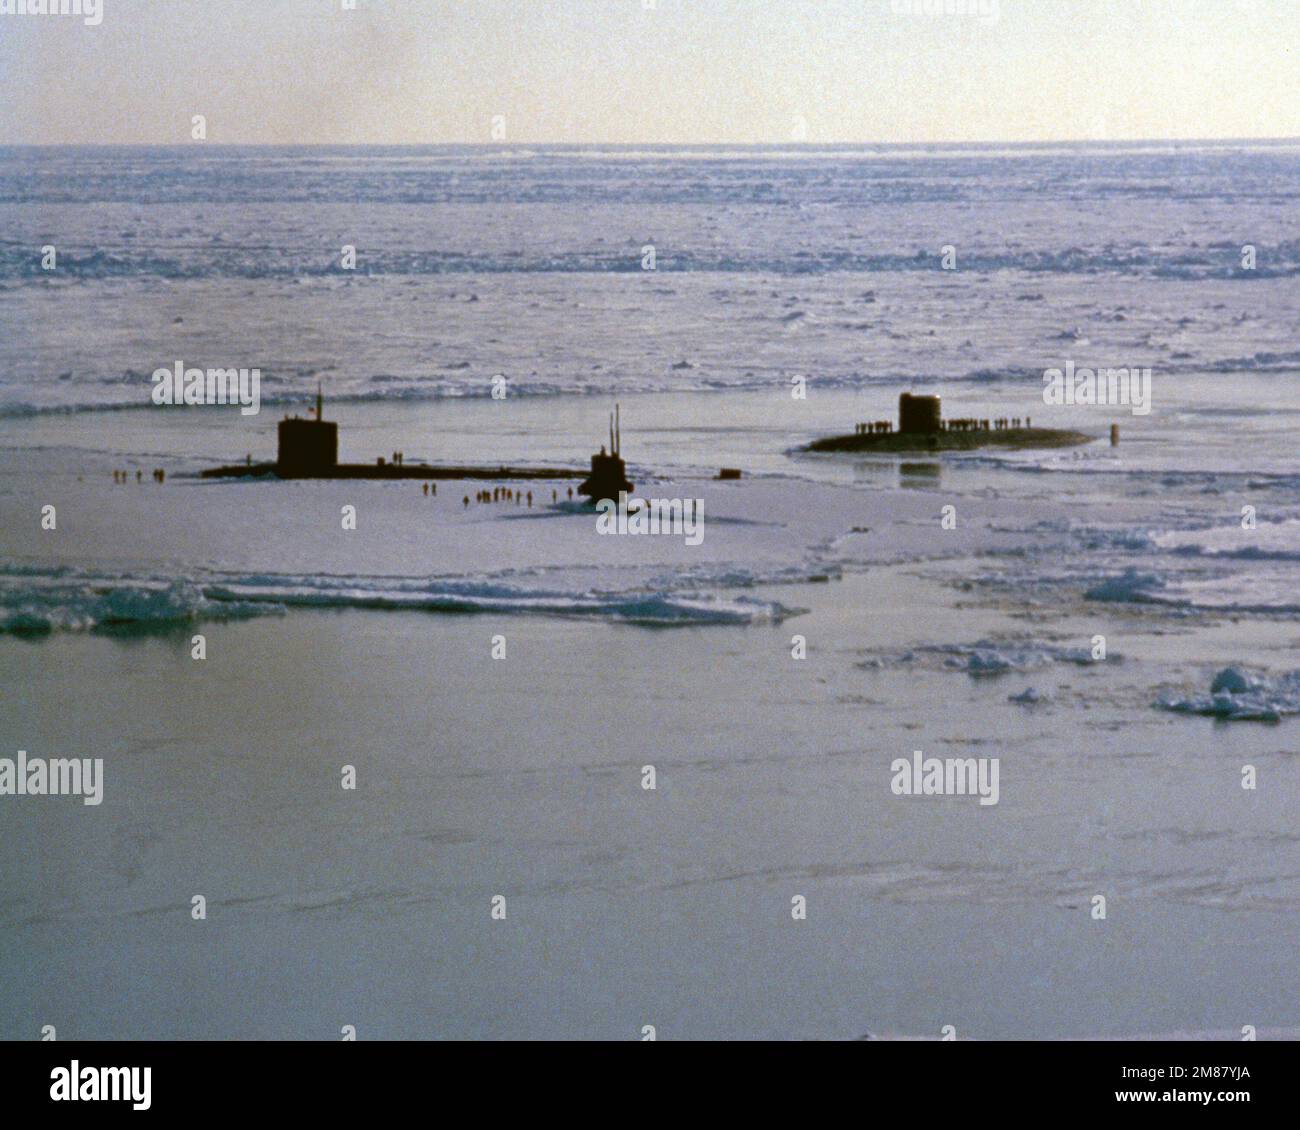 US and British sailors explore the Arctic ice cap while conducting the first US and British coordinated surfacing at the North Pole. The ships are from left to right: the nuclear-powered attack submarines, USS SEA DEVIL (SSN 664), USS BILLFISH (SSN 676), and the fleet submarine HMS SUPERB (S 109). (Substandard image). Country: Unknown Stock Photo